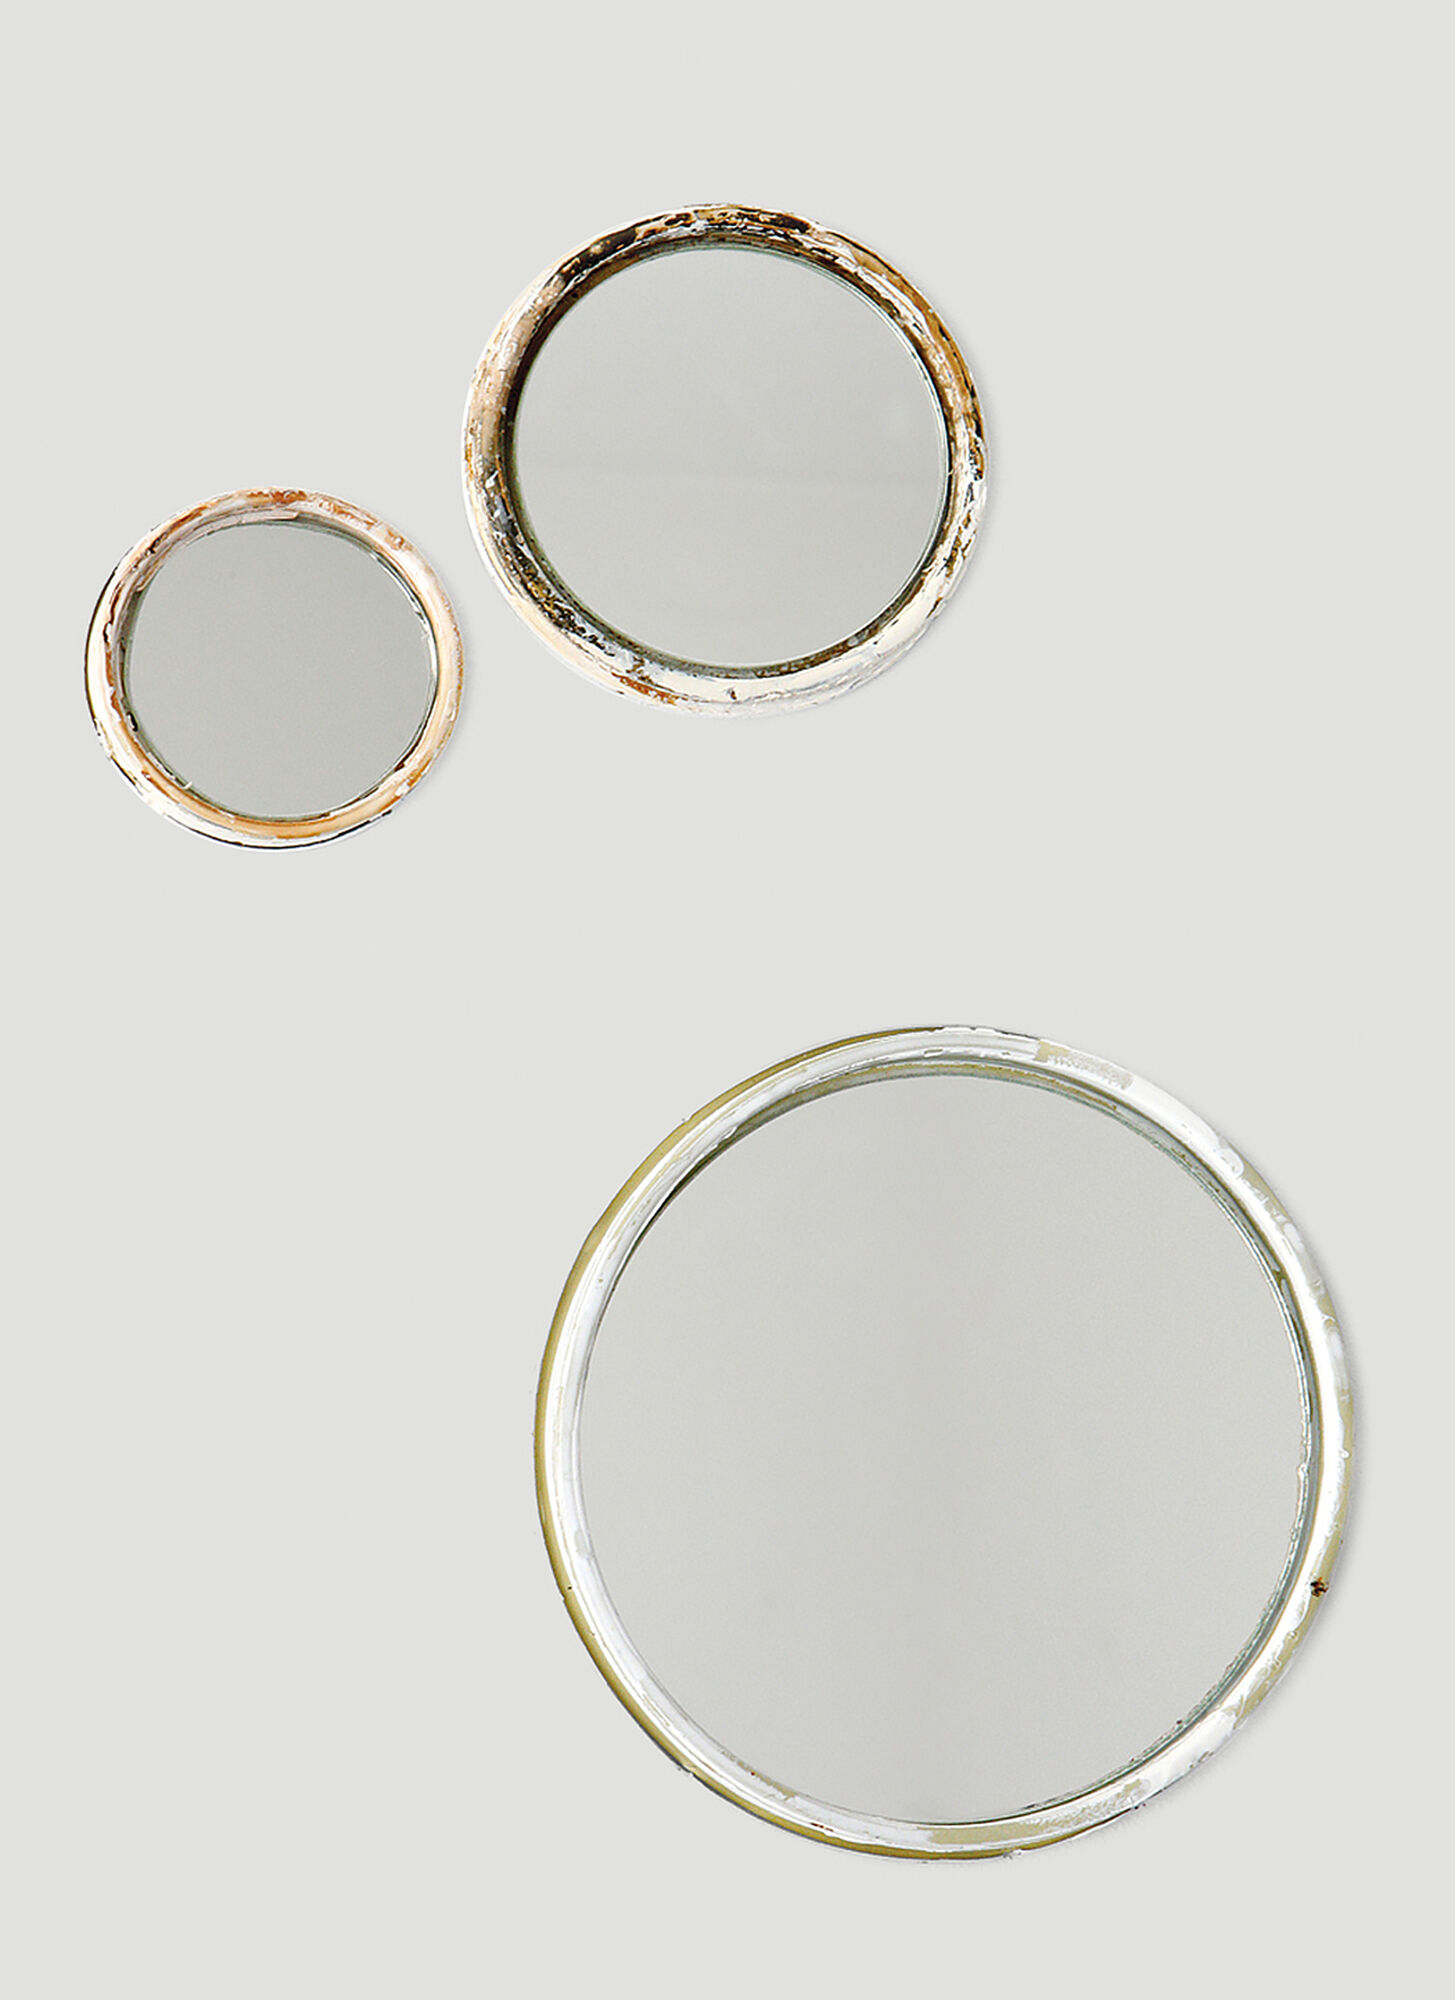 Valerie_objects Set Of Three Mirrors In White